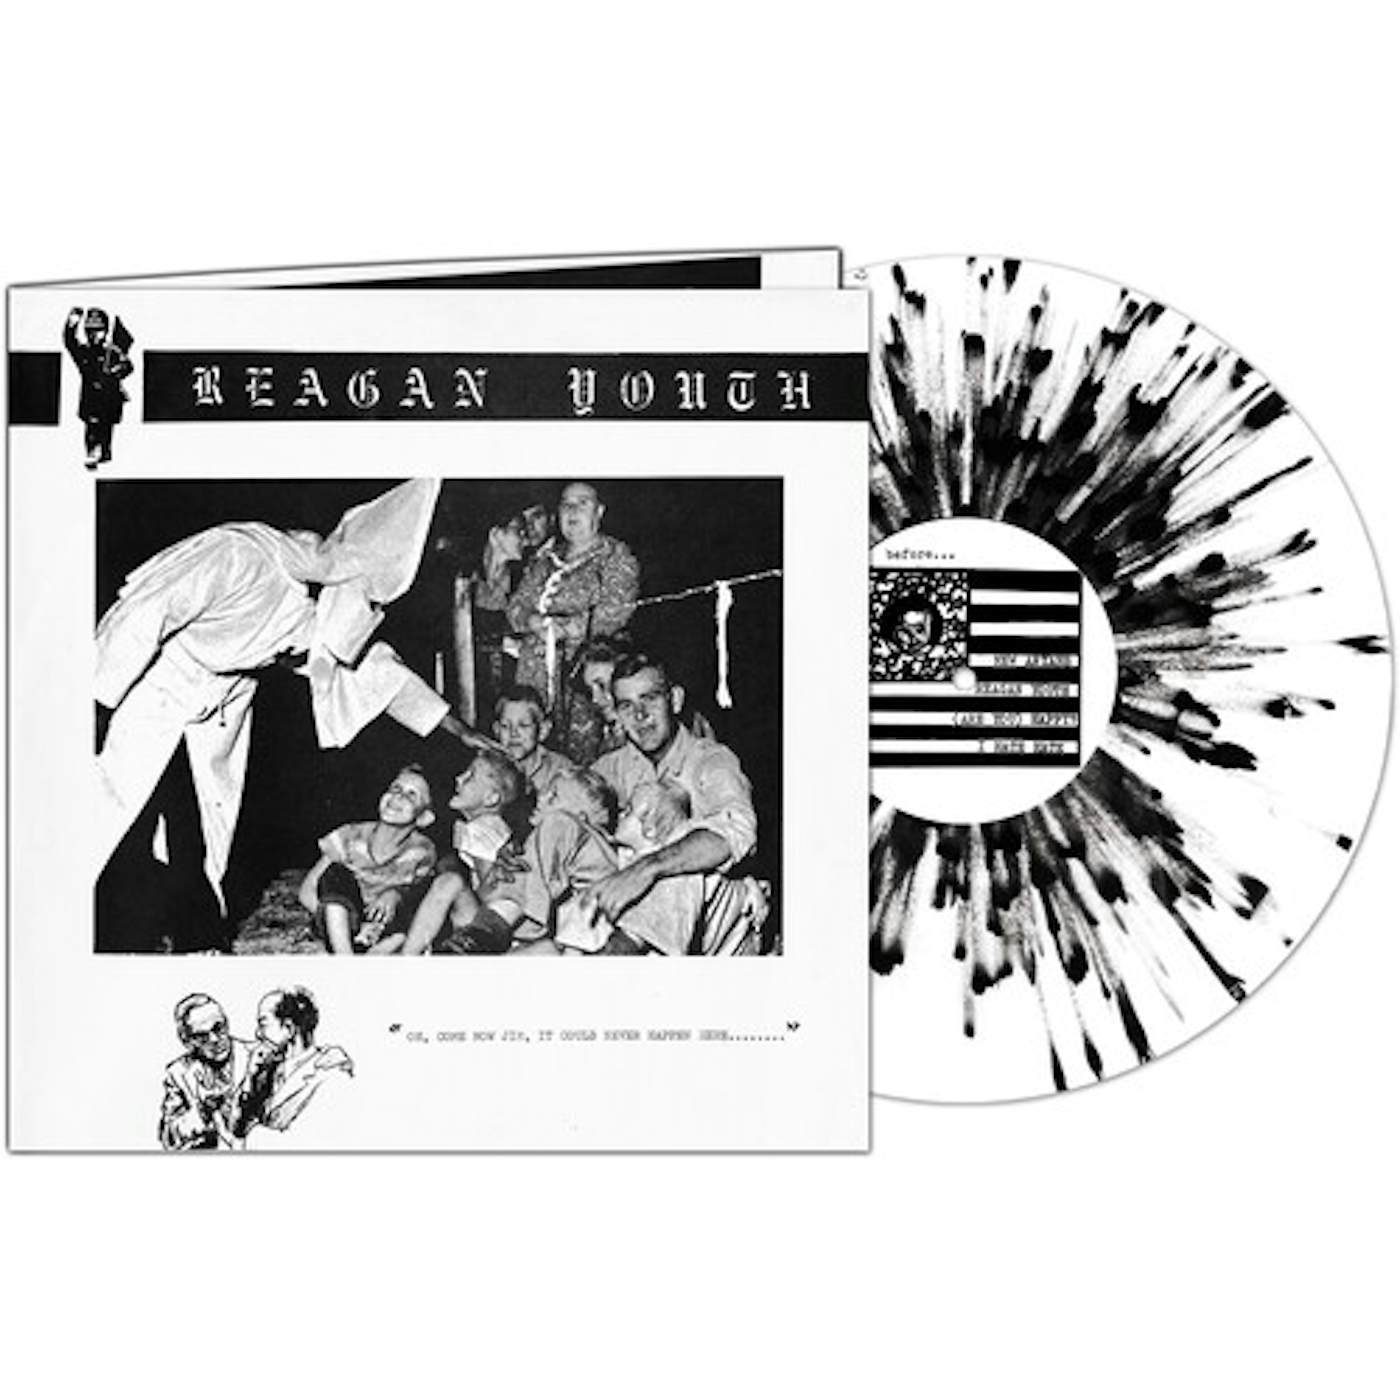 Reagan Youth YOUTH ANTHEMS FOR THE NEW ORDER - BLACK/WHITE Vinyl Record